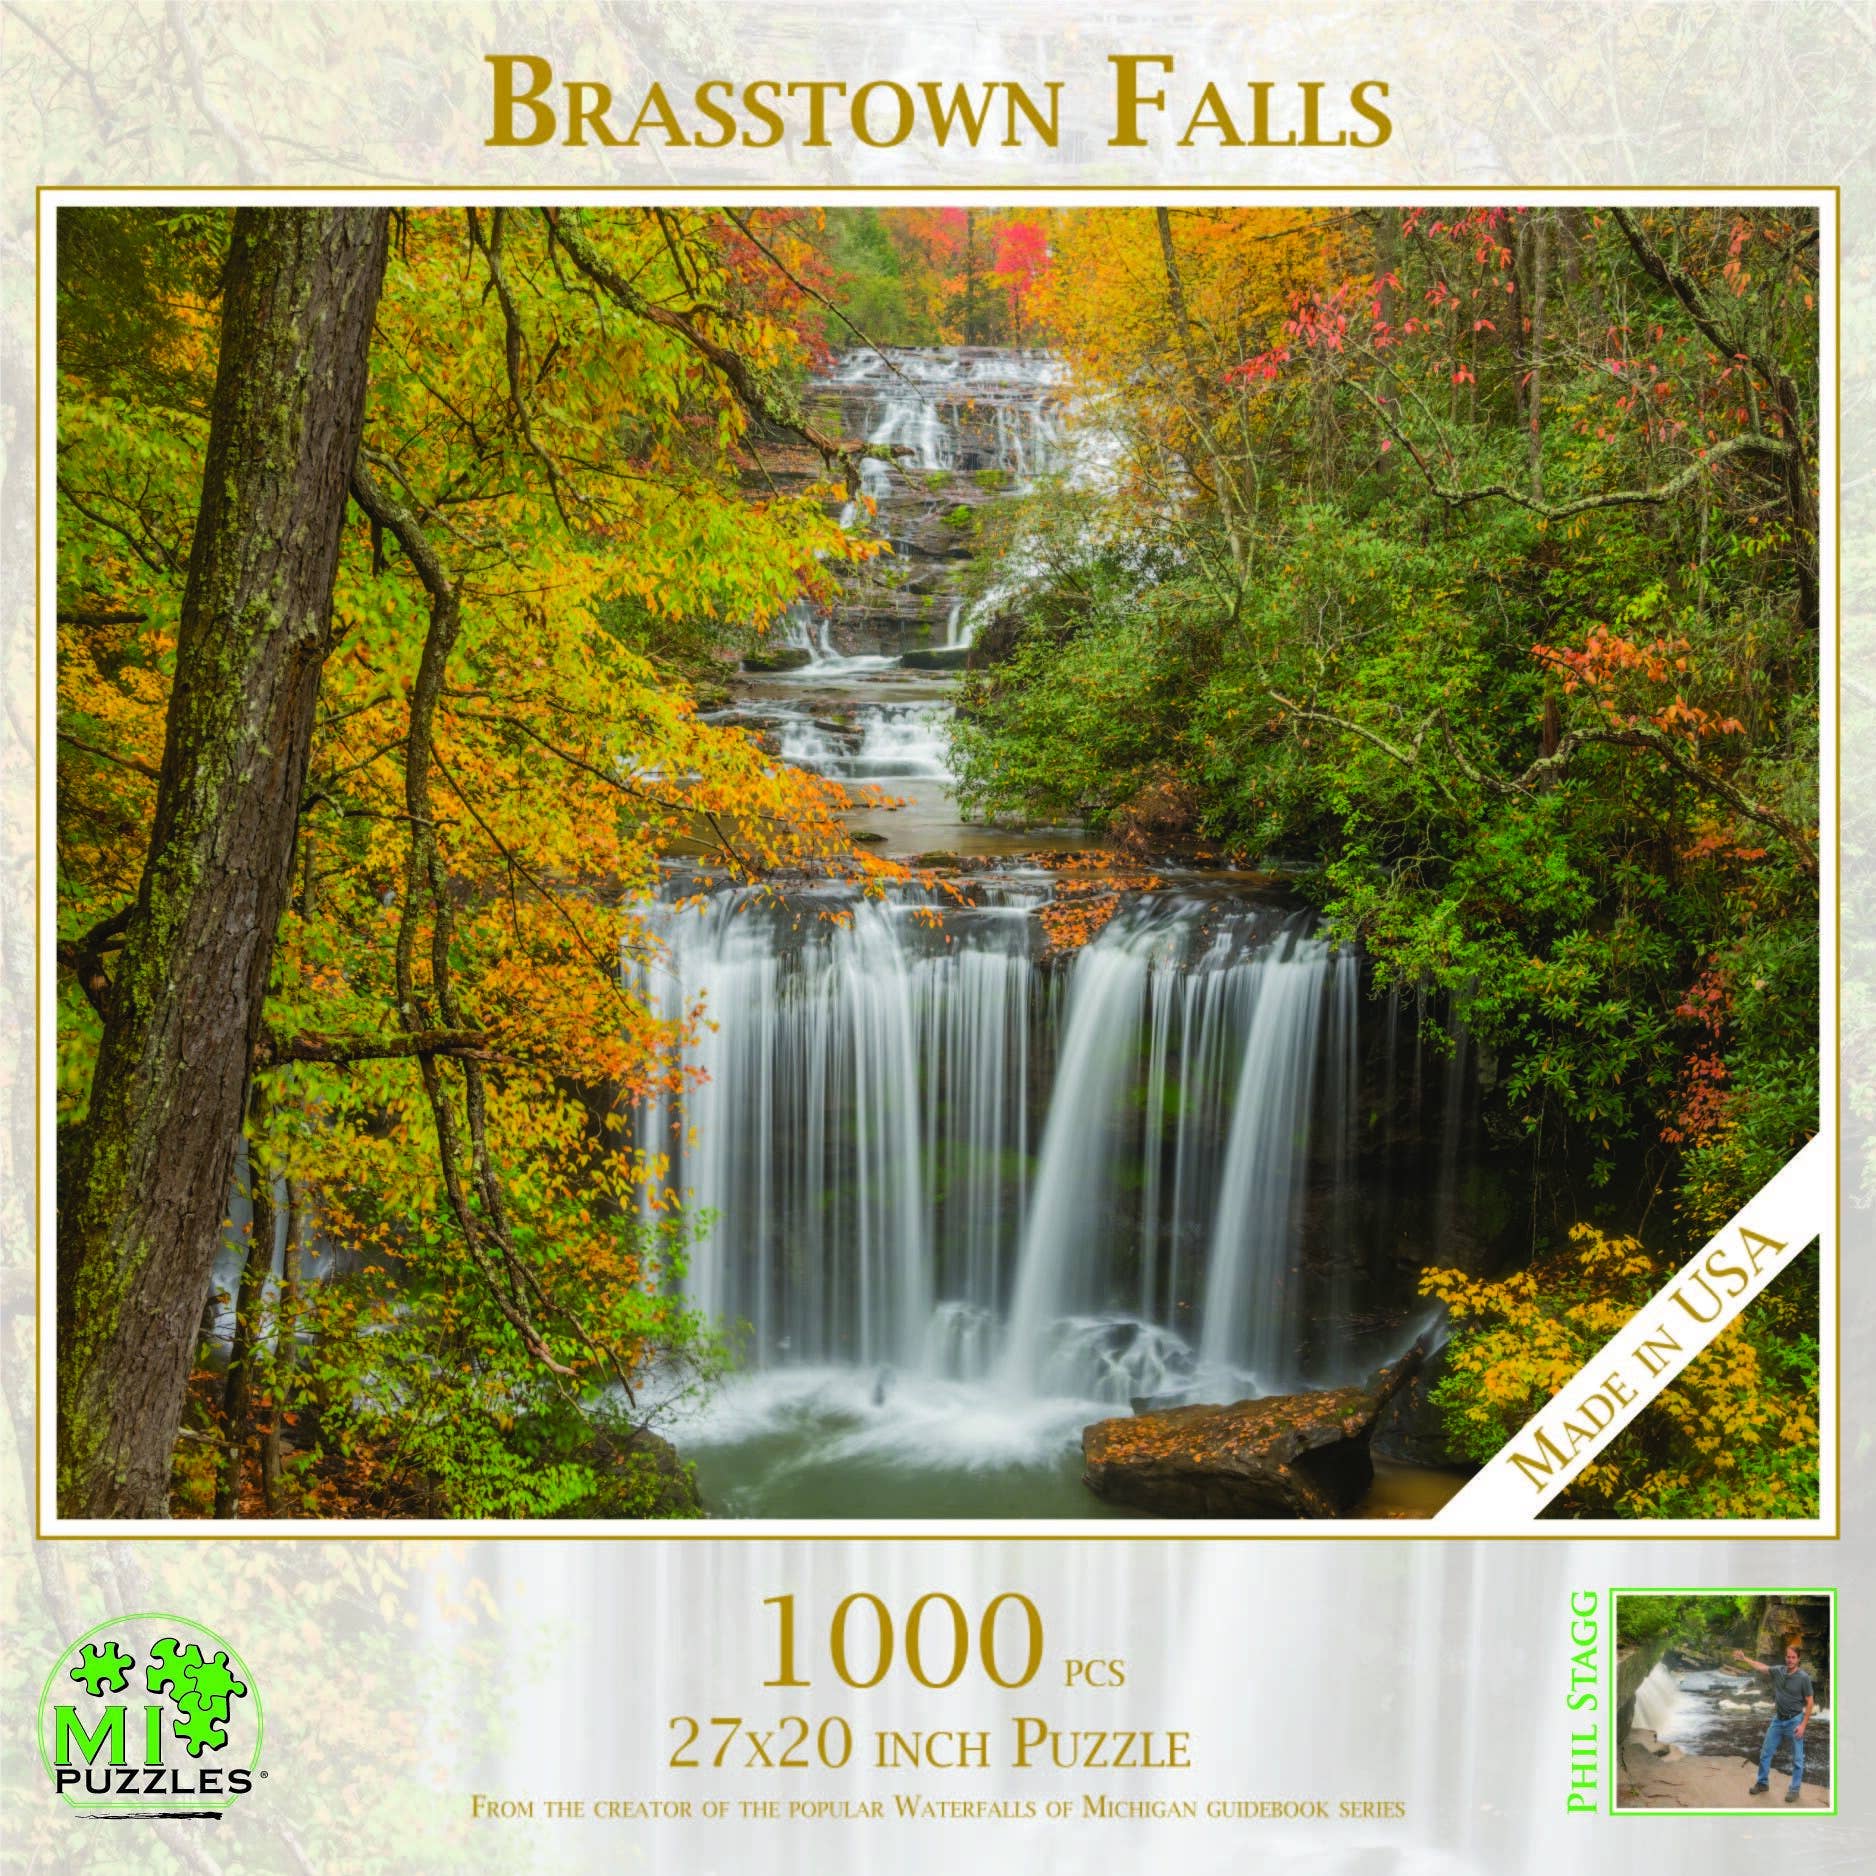 Brasstown Falls - 1000 Piece Puzzle - [ash-ling] Booksellers